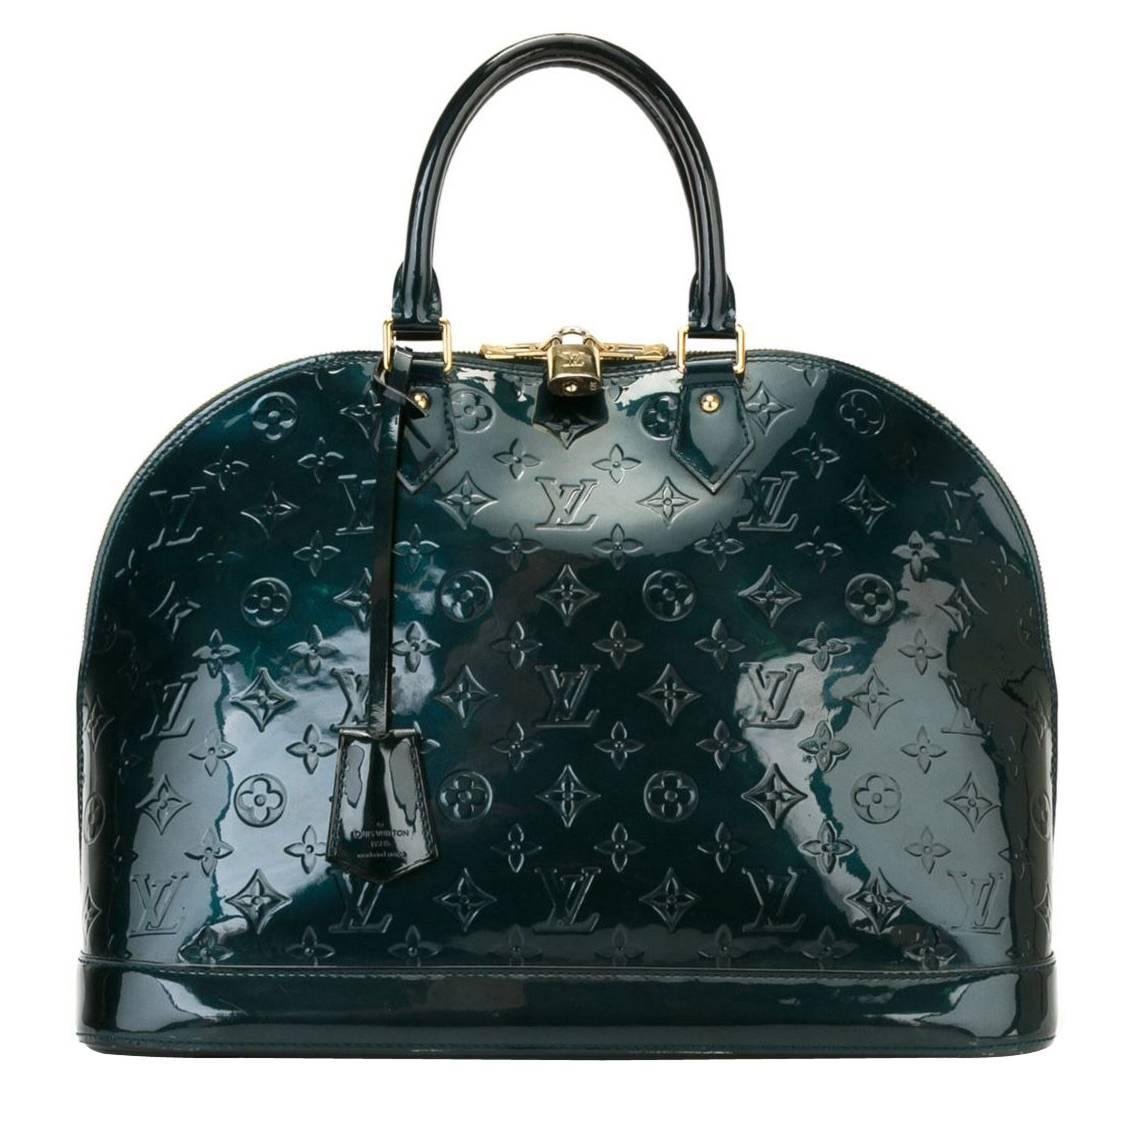 Louis Vuitton Monogram Patent Leather Alma Bag For Sale at 1stdibs